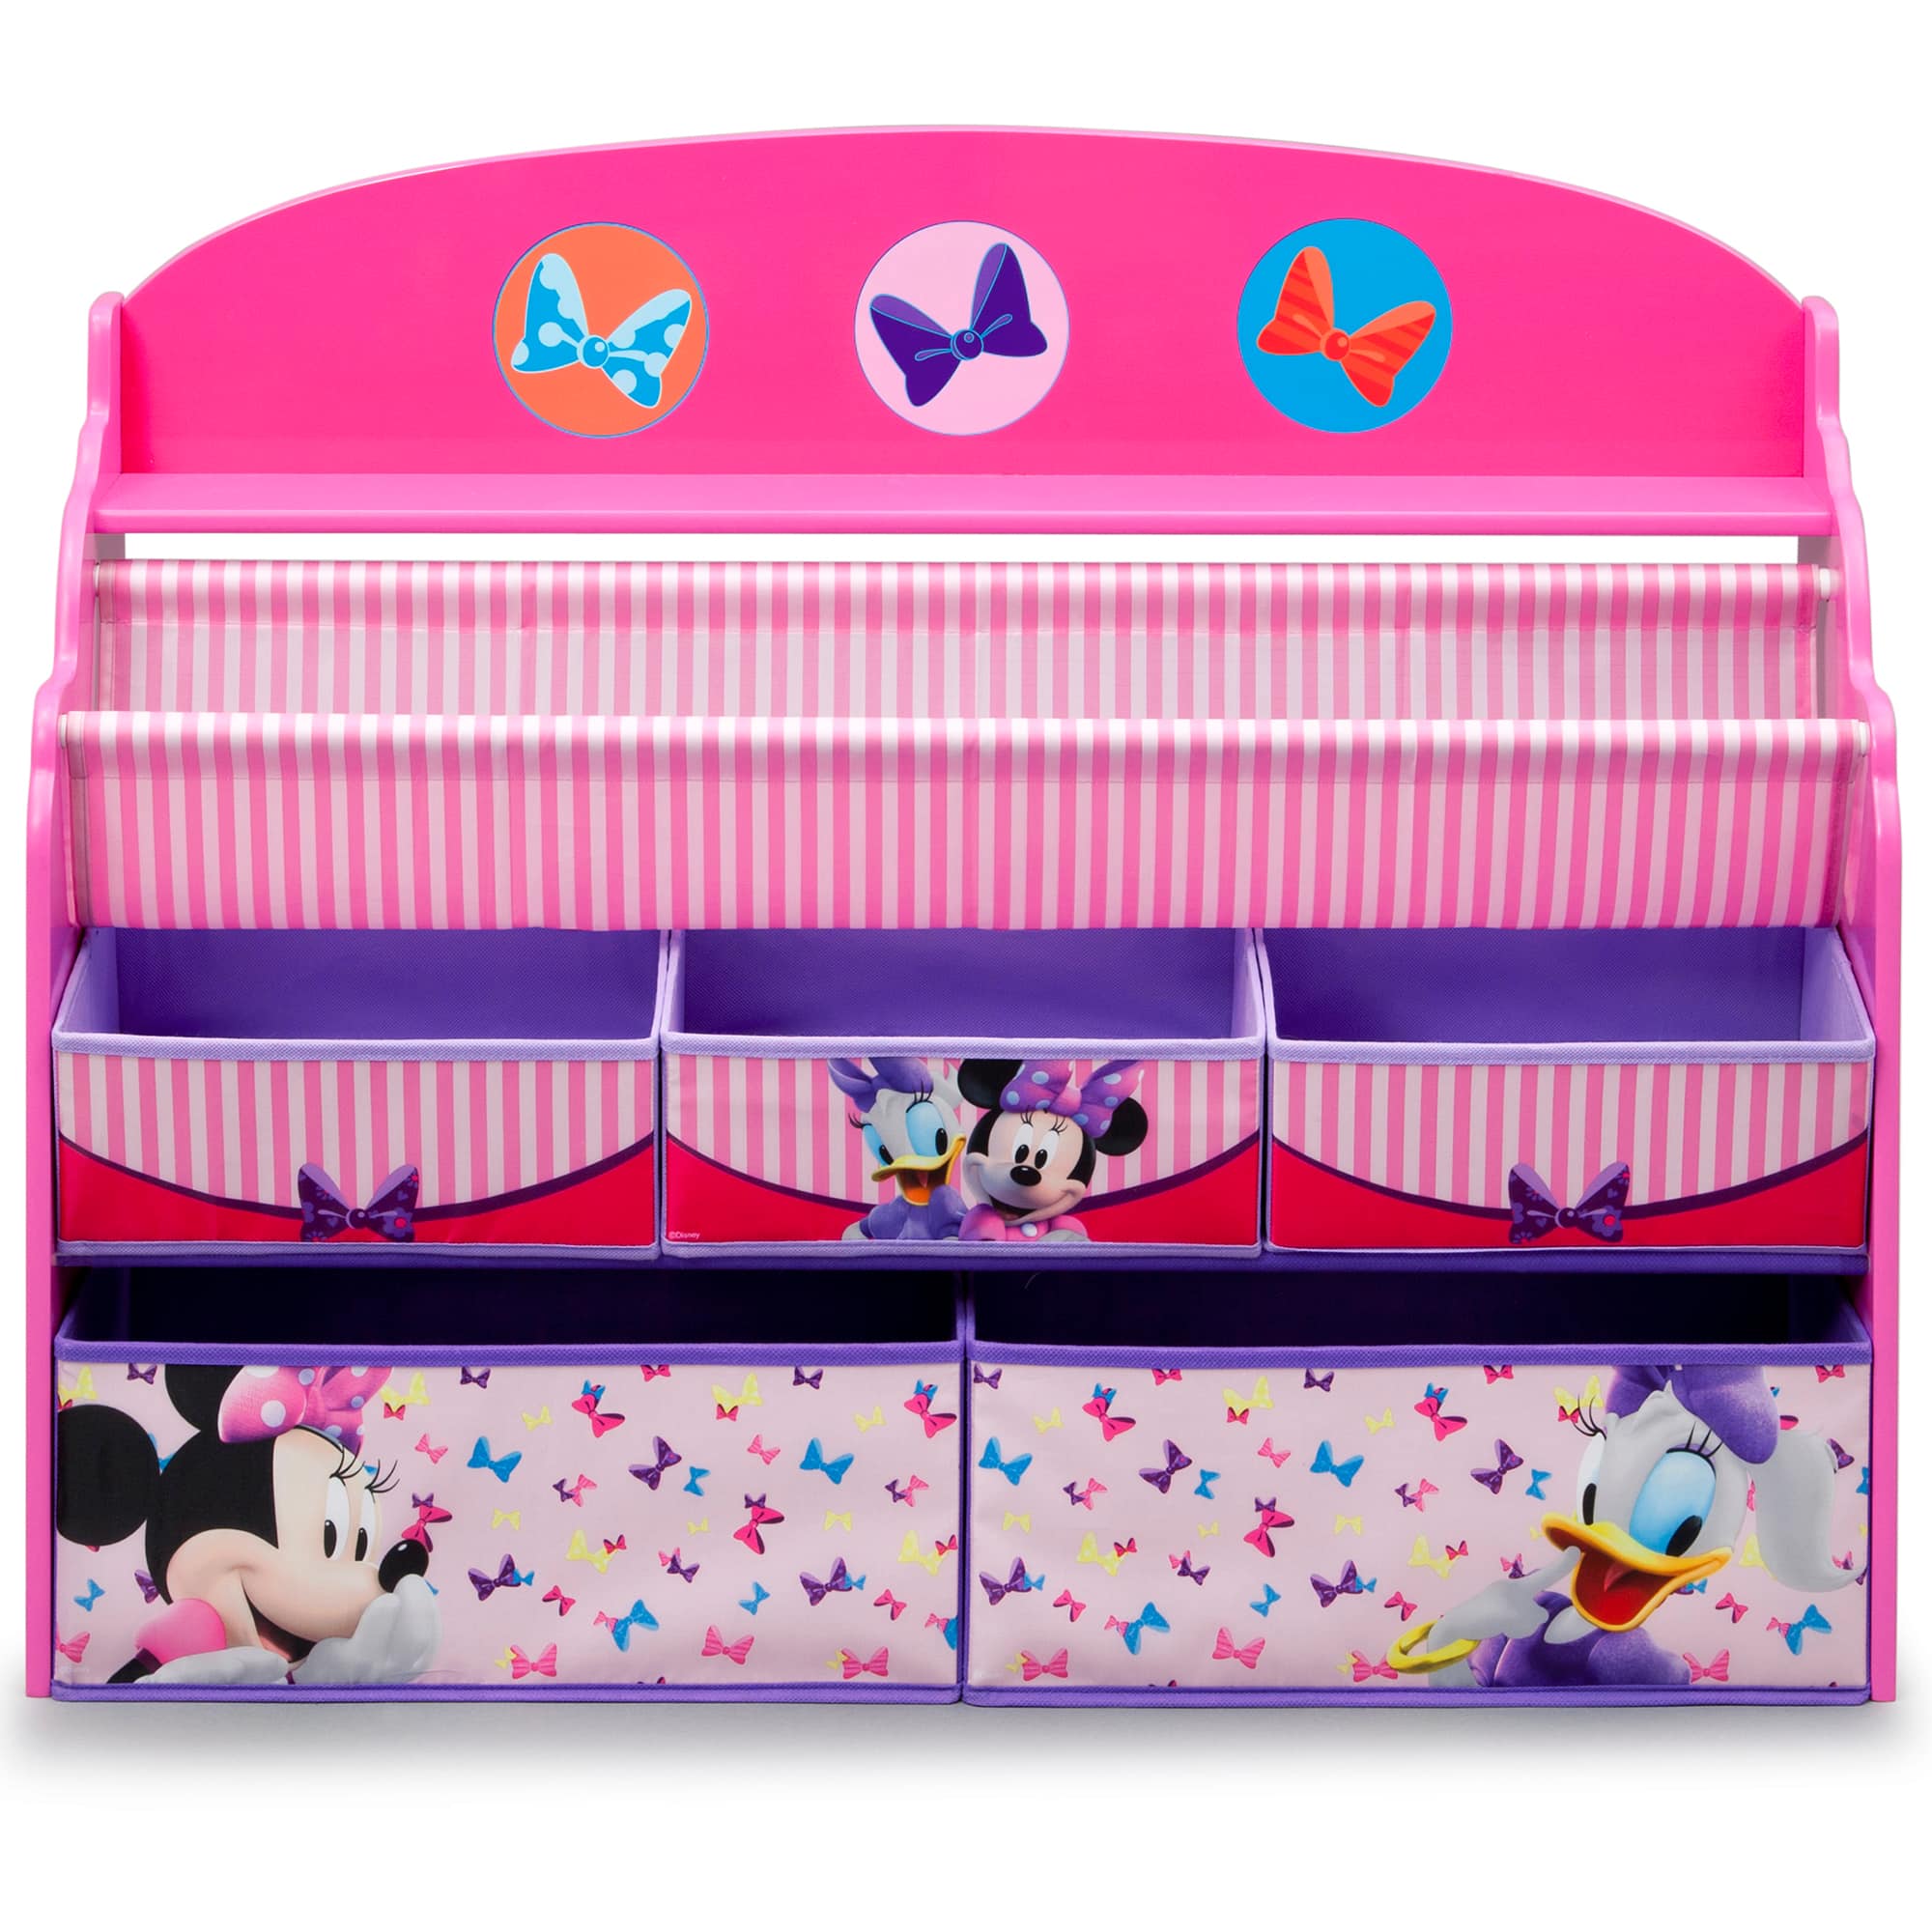 Disney Minnie Mouse Deluxe Toy Box